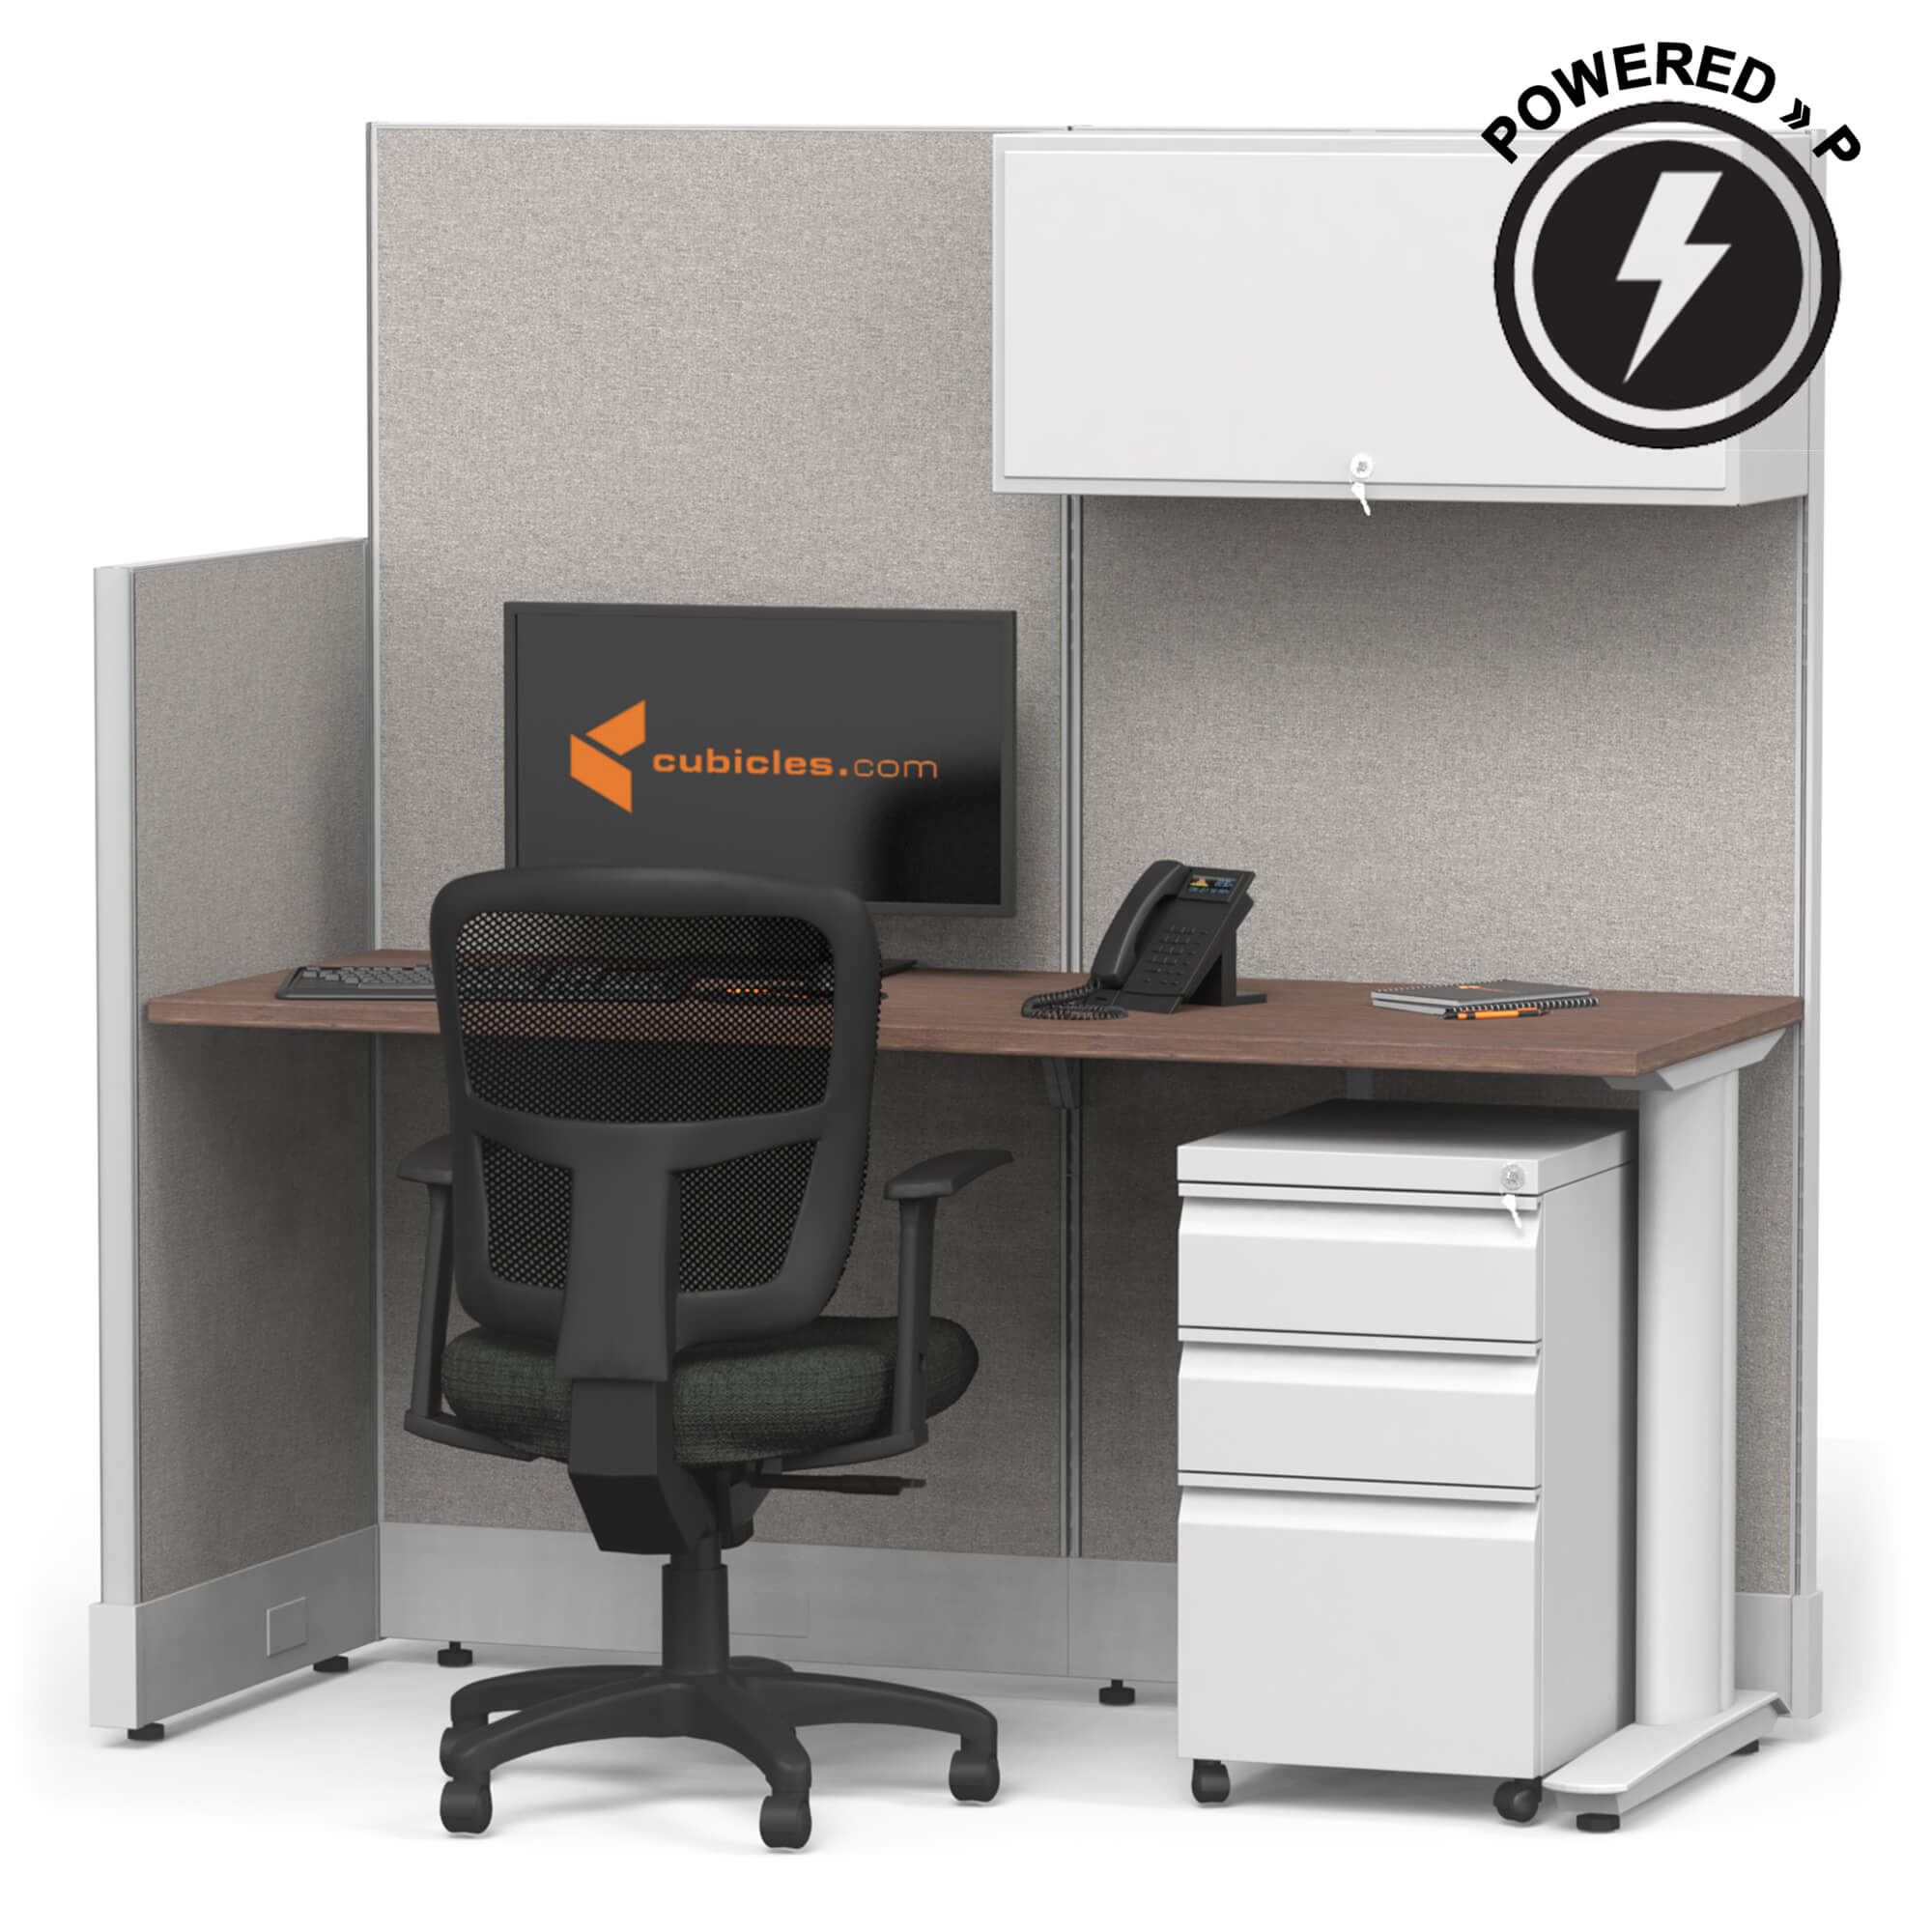 cubicle-desks-straight-with-storage-1pack-powered-sign.jpg